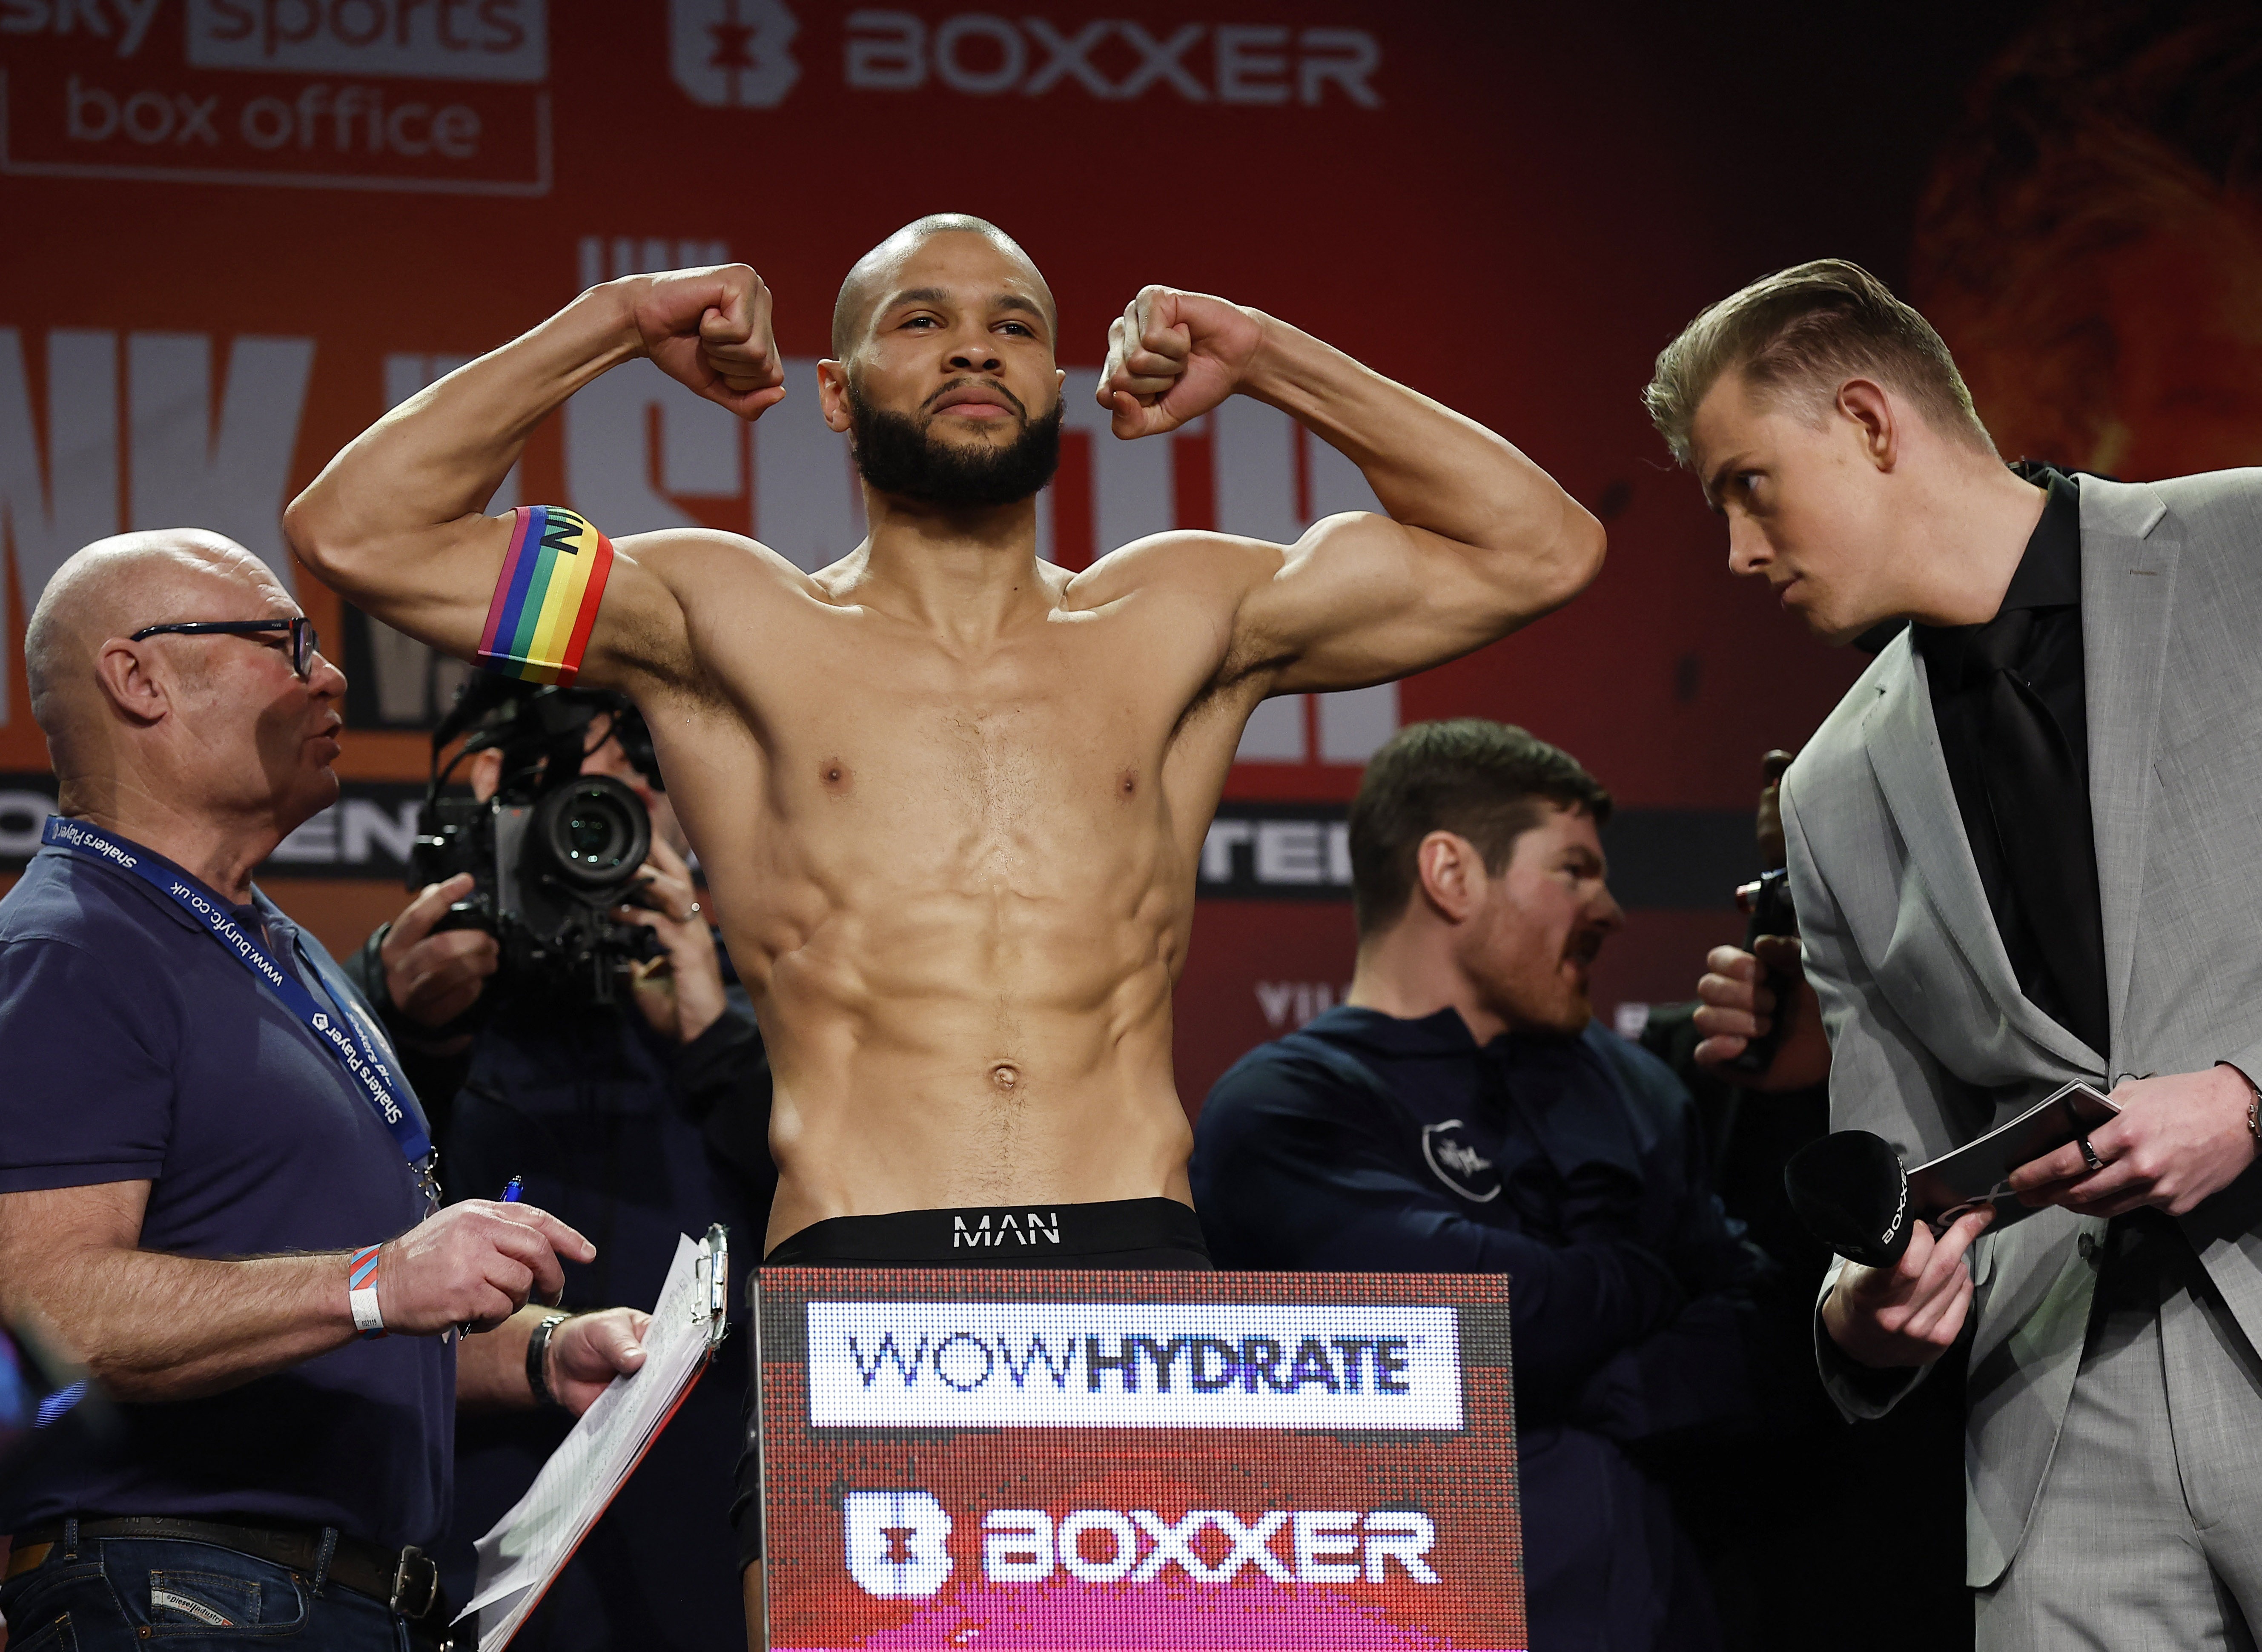 , Chris Eubank Jr wears Man Utd shirt to Liam Smith weigh-in and tips scales in rainbow armband after homophobia row